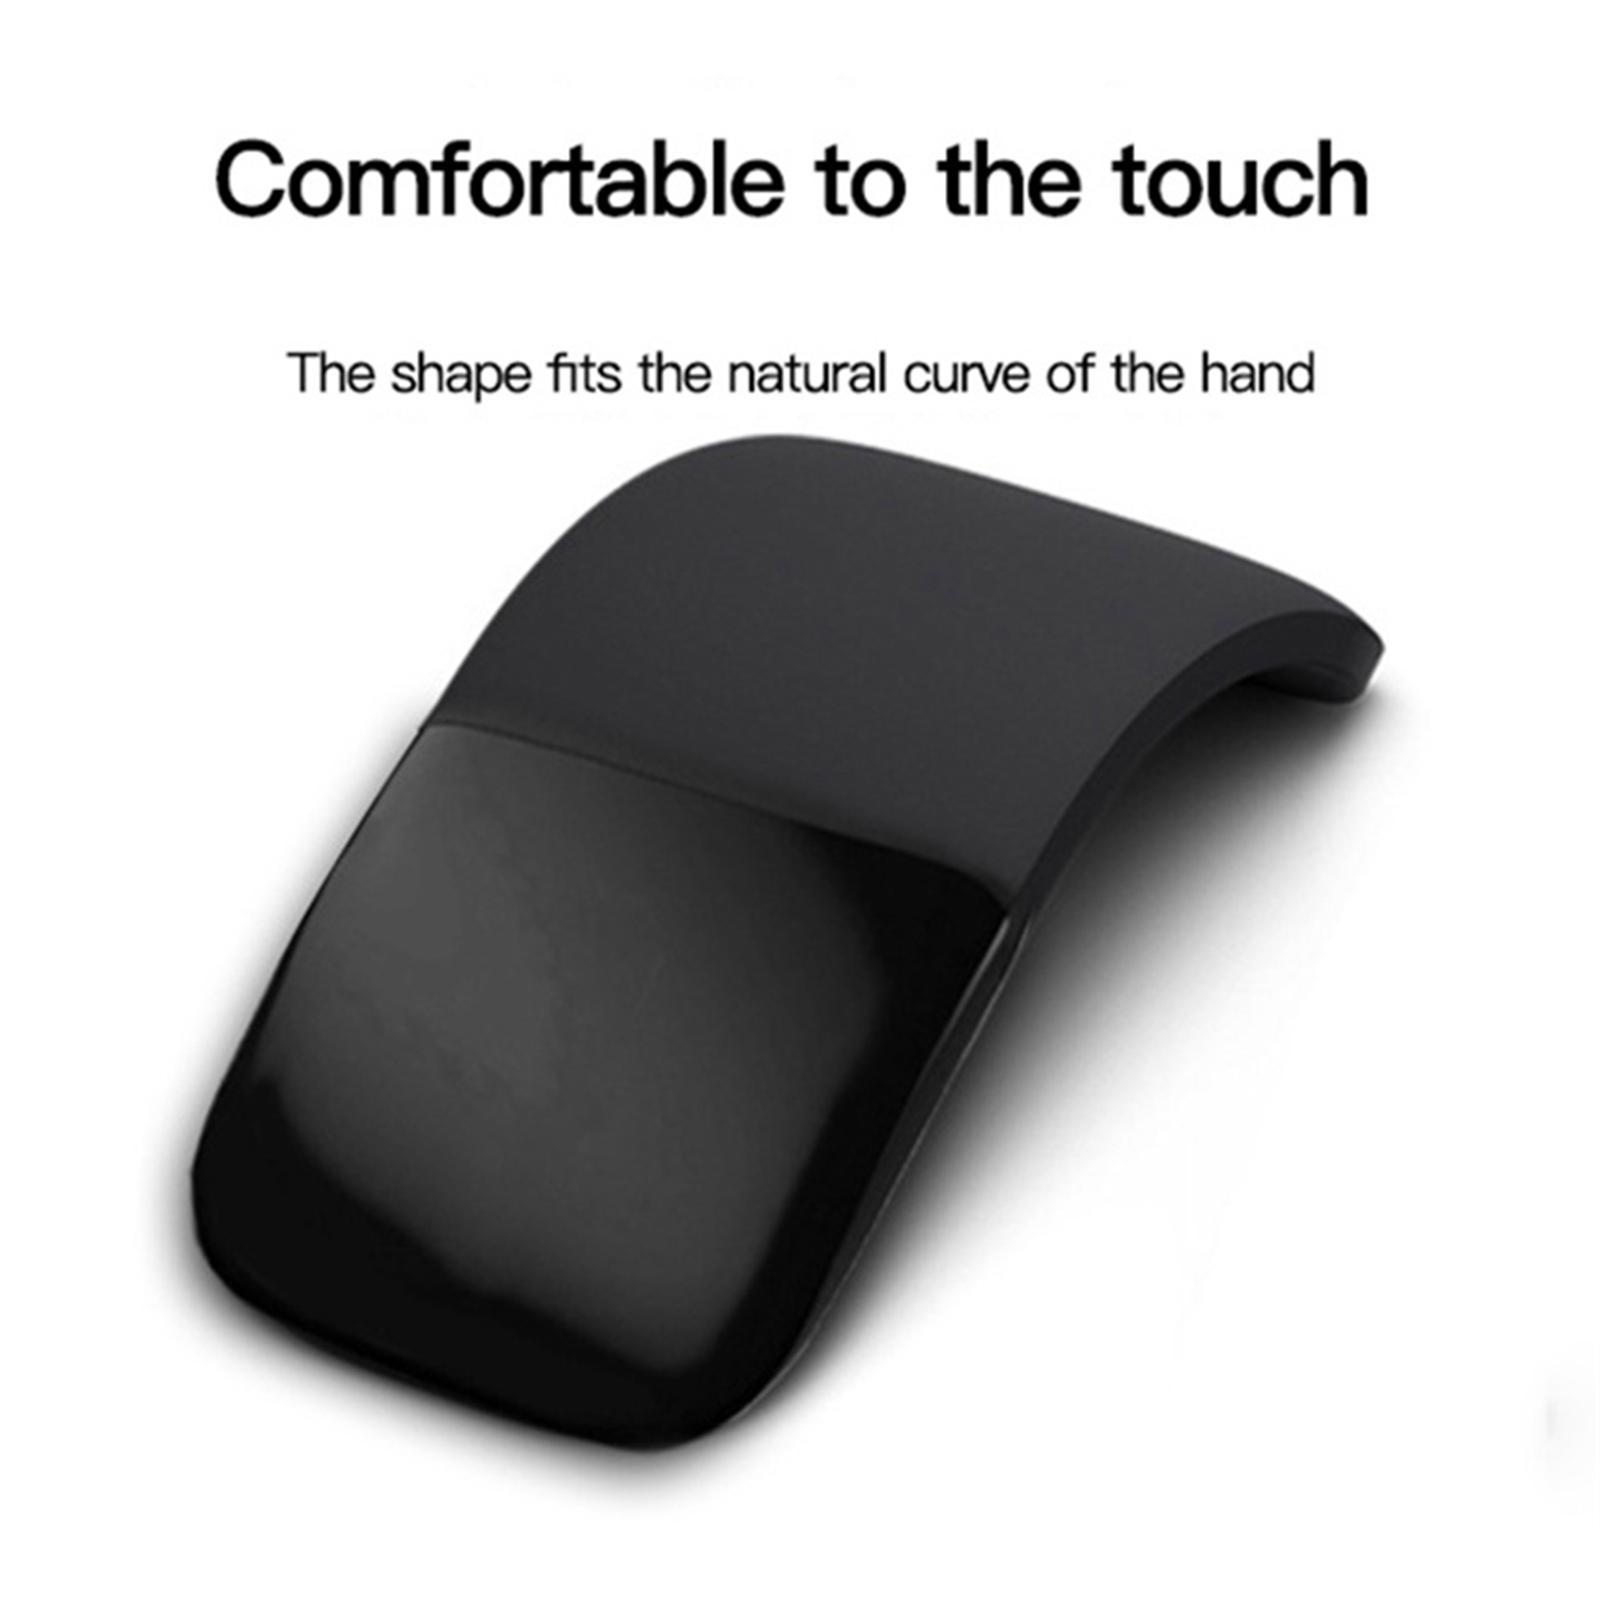 Bluetooth  Mouse Curved Mini Lightweight Folding for Tablet Laptop